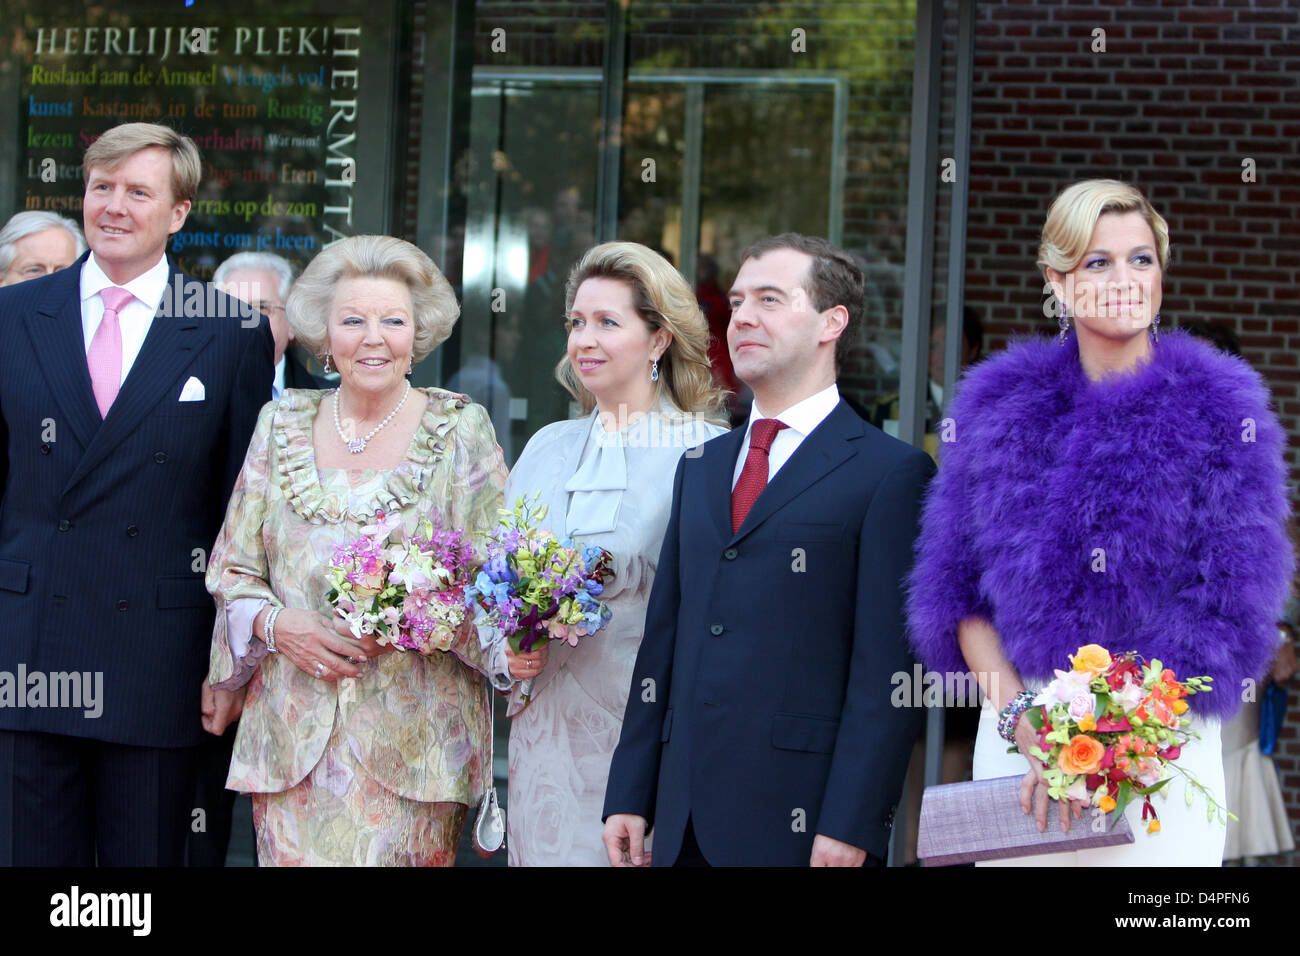 (L-R) Crown Prince Willem-Alexander of the Netherlands, Queen Beatrix of the Netherlands, Svetlana Medvedeva, Russian President Dmitri Medvedev, and Princess Maxima of the Netherlands attend the opening of the museum Hermitage Amsterdam, The Netherlands, 19 June 2009. The Hermitage Amsterdam is a dependance of the Russian Hermitage in St. Petersburg. Amsterdam?s museum organizes ex Stock Photo